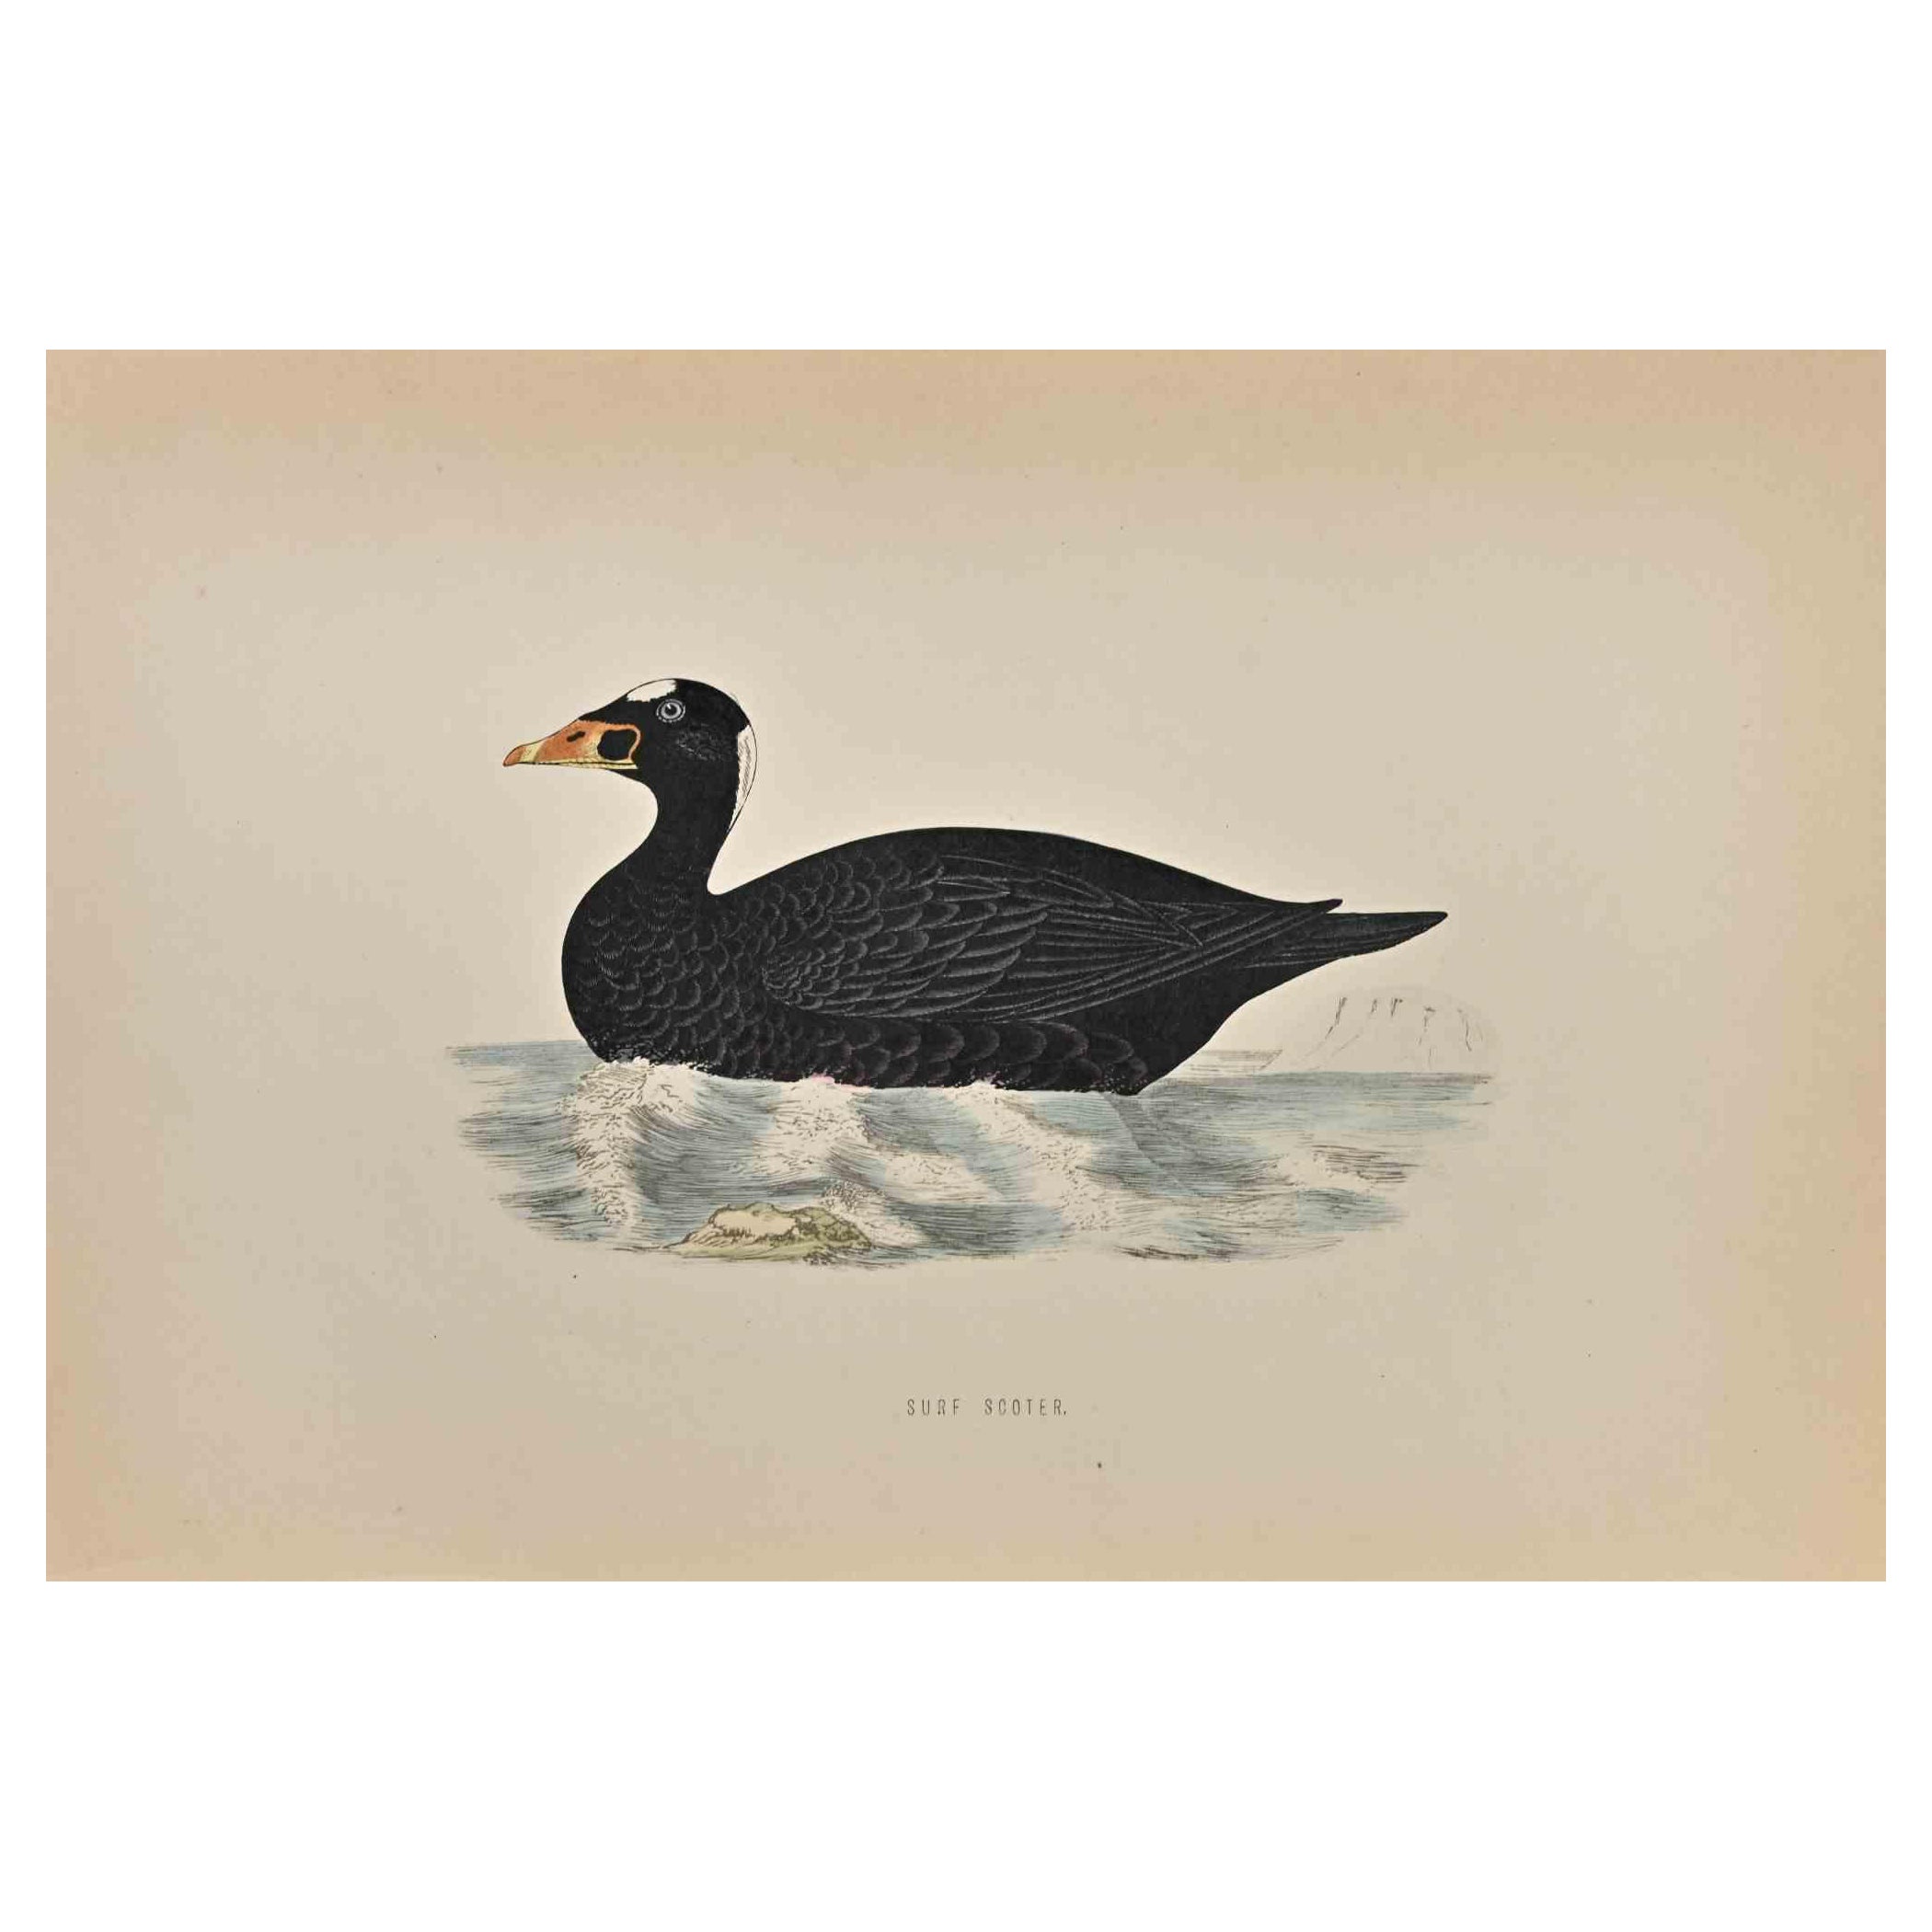 Surf Scoter is a modern artwork realized in 1870 by the British artist Alexander Francis Lydon (1836-1917) . 

Woodcut print, hand colored, published by London, Bell & Sons, 1870.  Name of the bird printed in plate. This work is part of a print